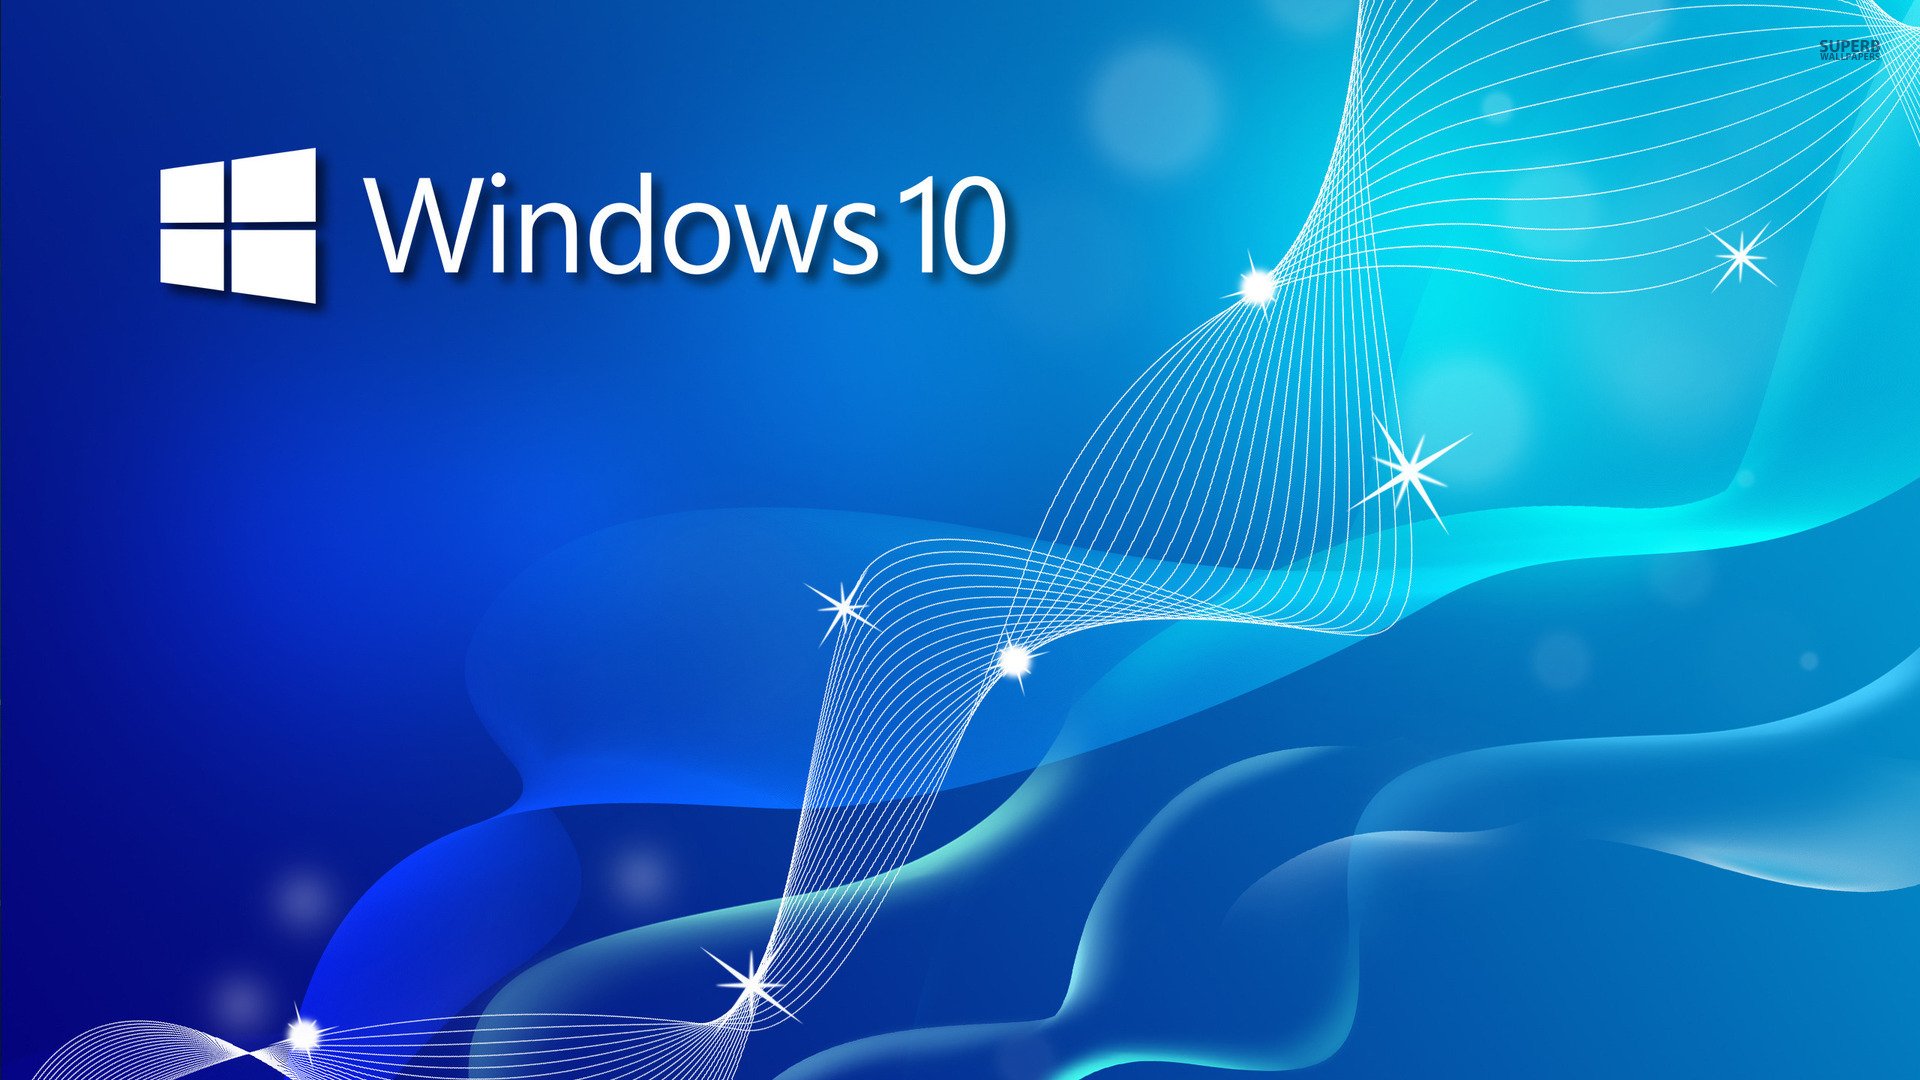 Download windows 10 background images 7 zip download for windows 7 professional